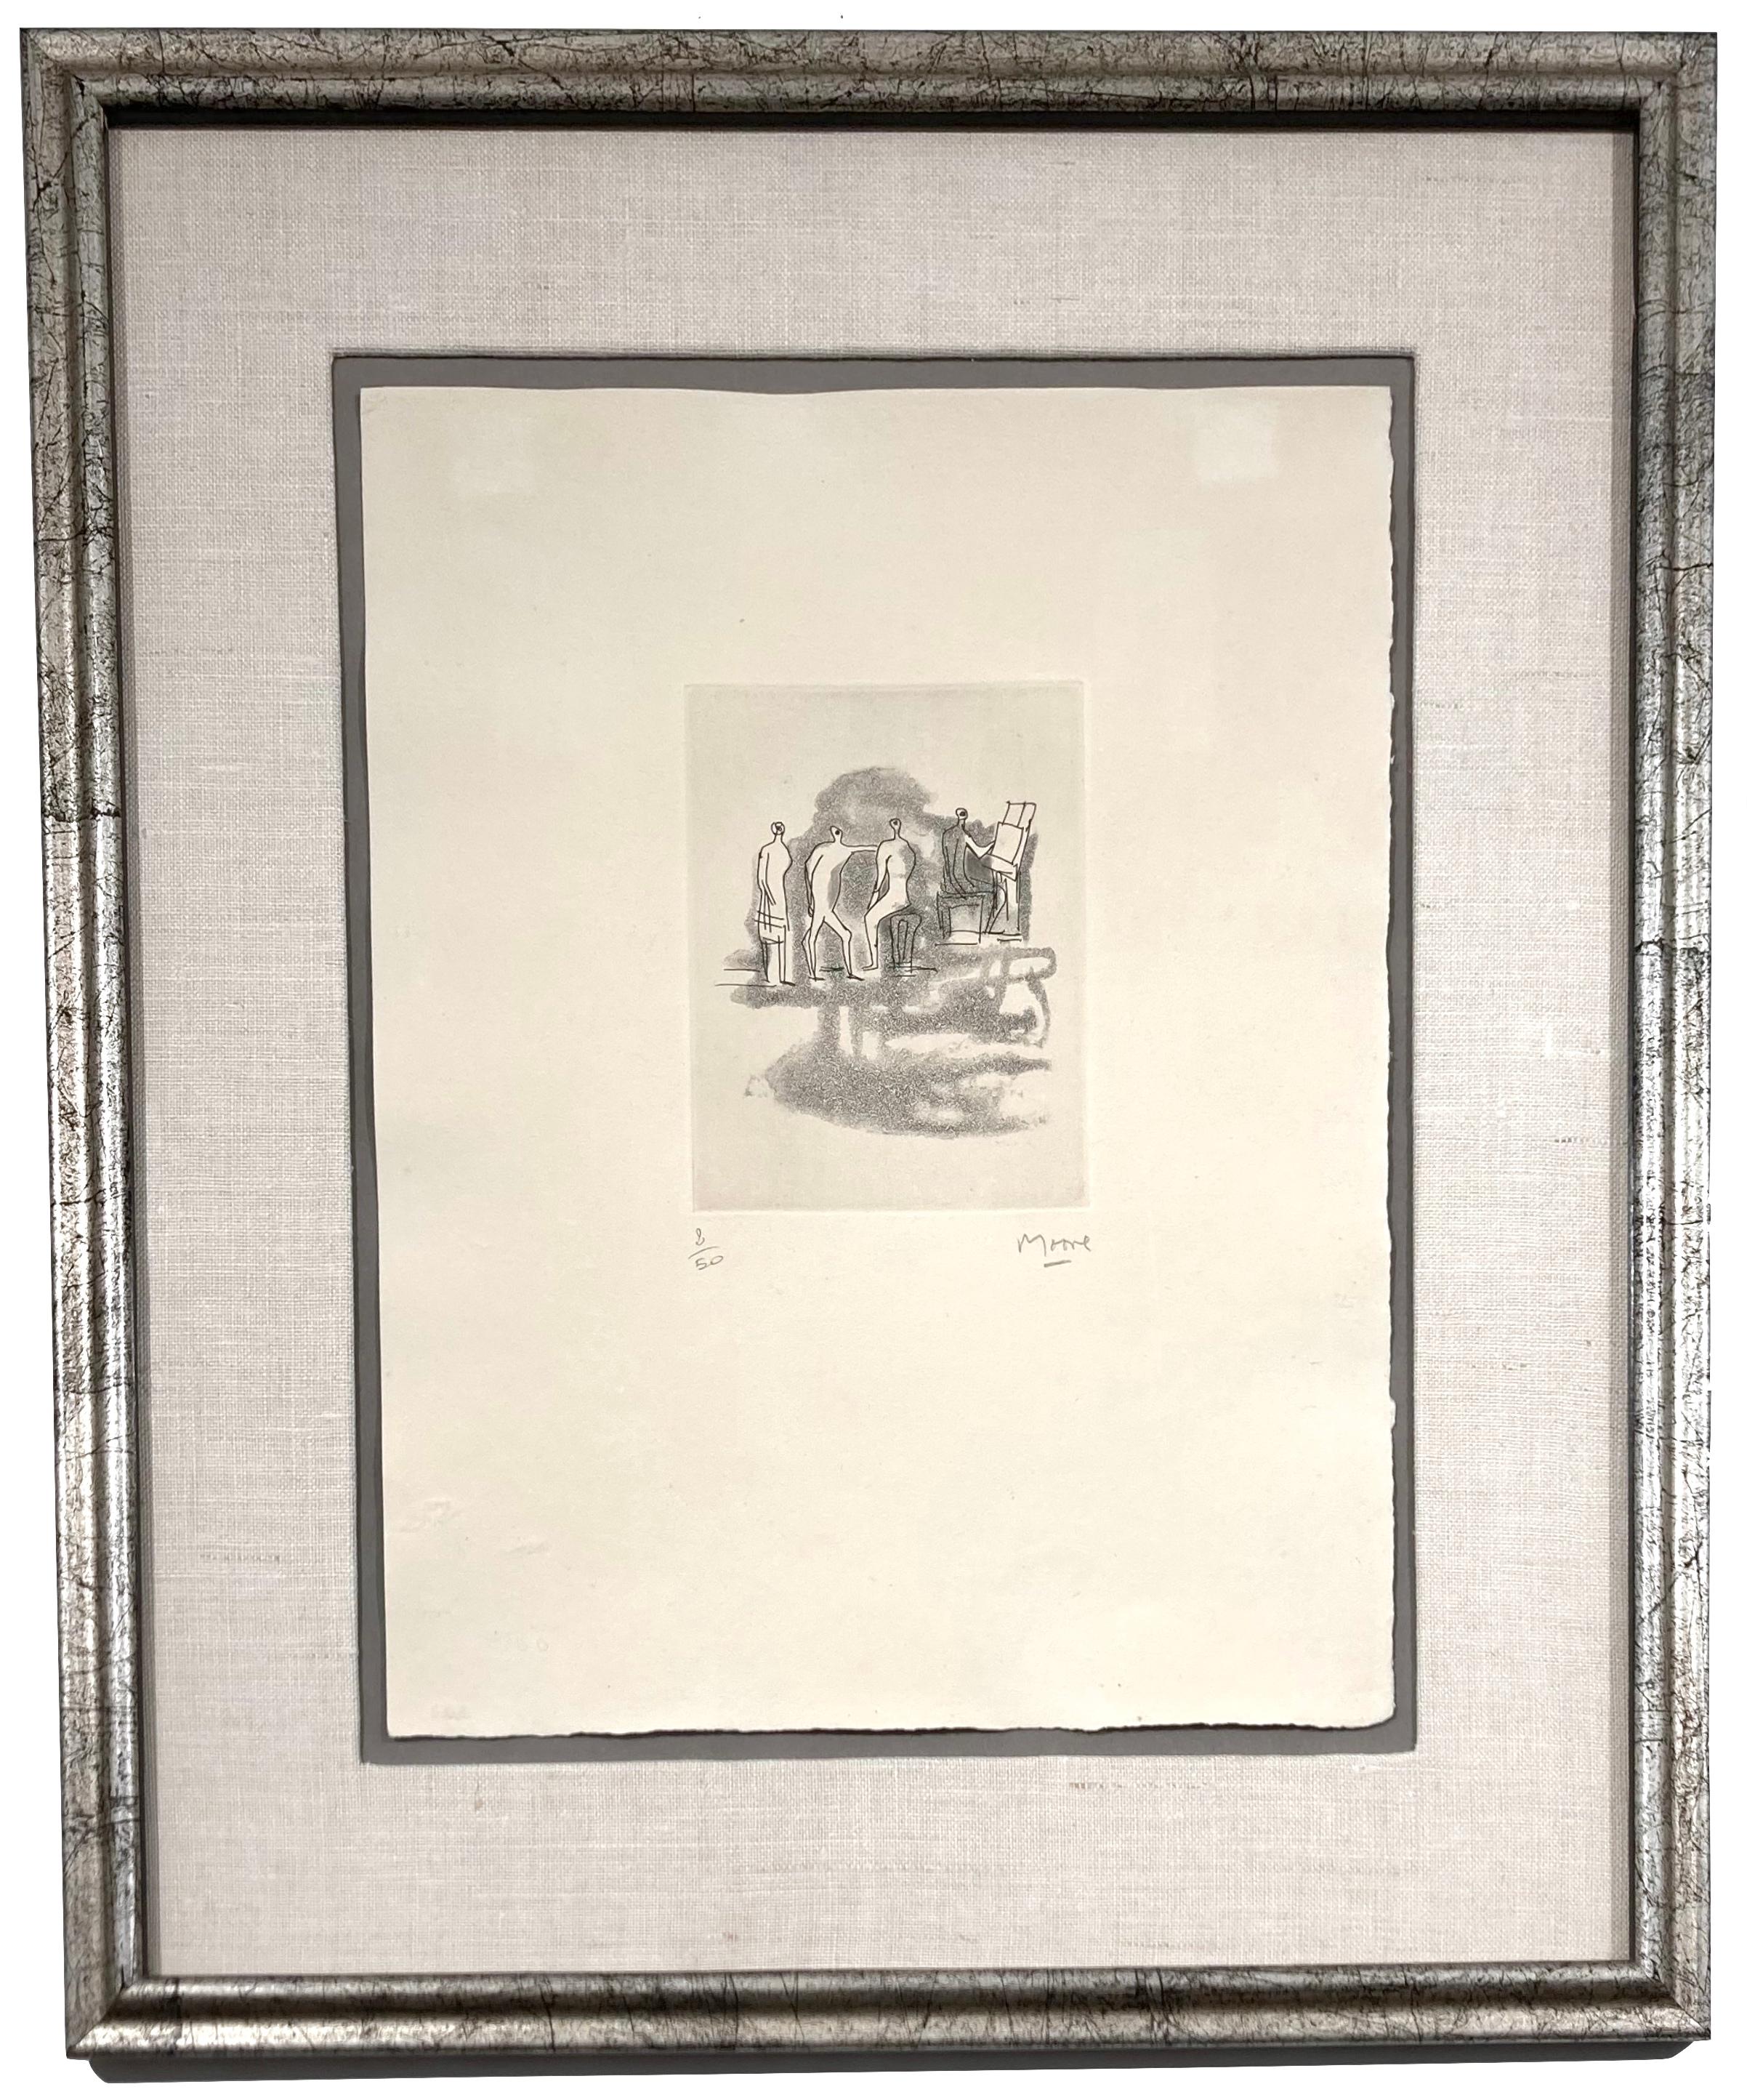 Concerto - Modern Print by Henry Moore